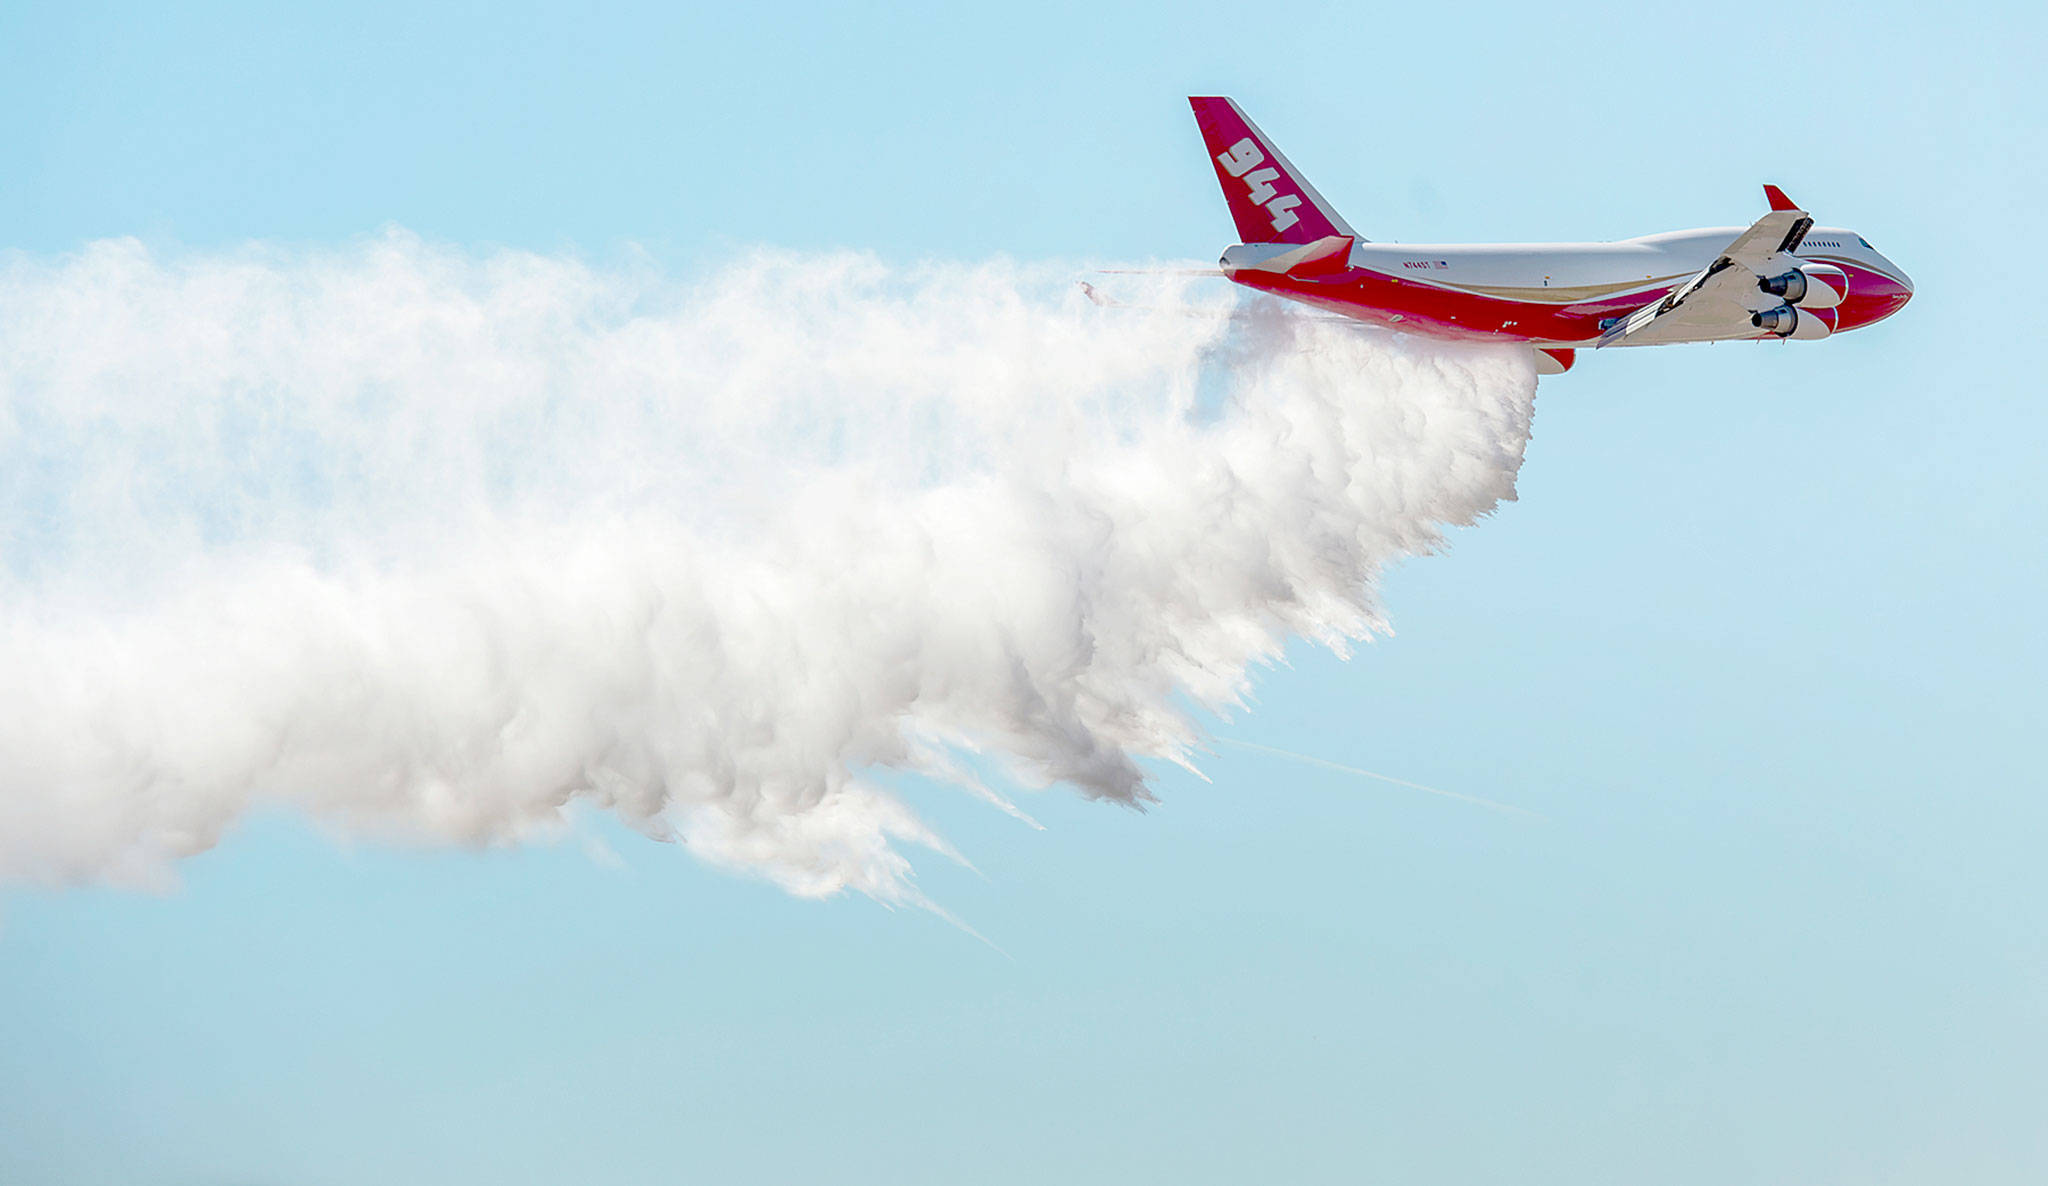 The Boeing 747-400 Global SuperTanker drops half a load of its 19,200-gallon capacity during a ceremony at Colorado Springs, Colorado, in 2016. (Christian Murdock/The Gazette via AP, File)